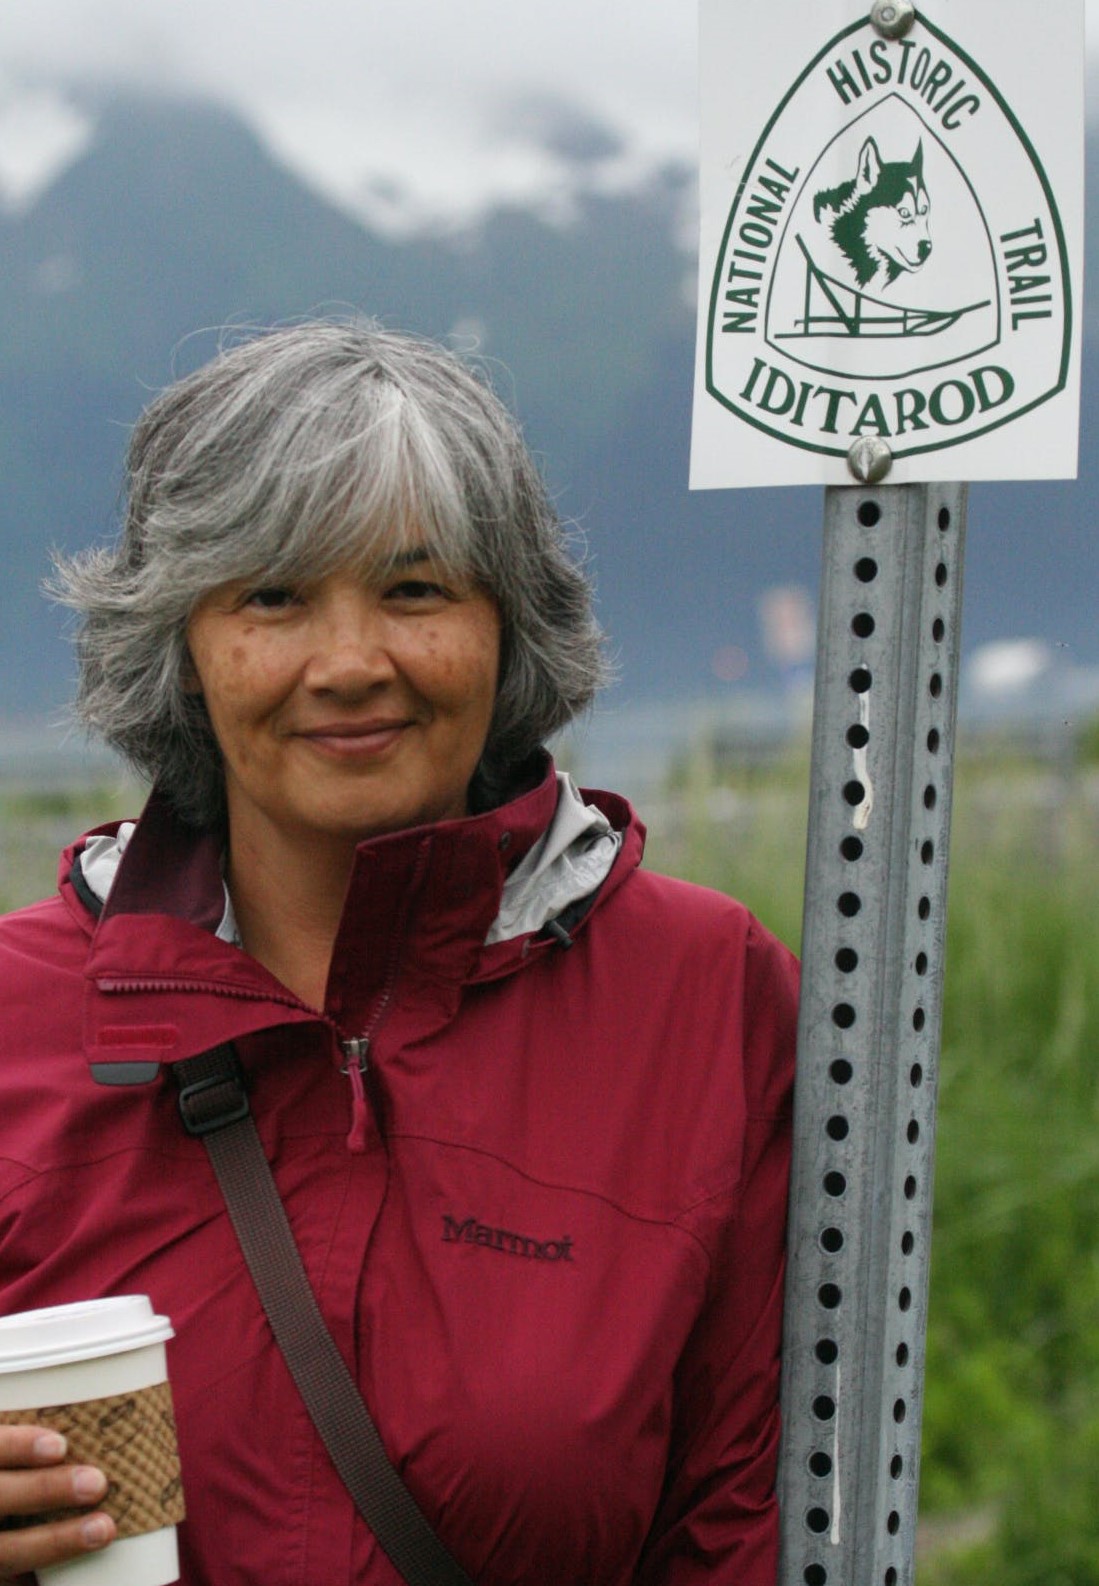 Photo of author Susan Harness. She is standing next to a road sign that reads "National Historic Trail" IDITAROD." She is smiling, and holding a beverage in a coffee takeout cup. She is wearing a zipped bright red outdoor jacket that has a hood attached, and a cross-body bag of some kind. She has short, salt-and-pepper colored hair with long bangs that hang to her eyebrows. In the distance behind her are tall, snow-capped mountains.